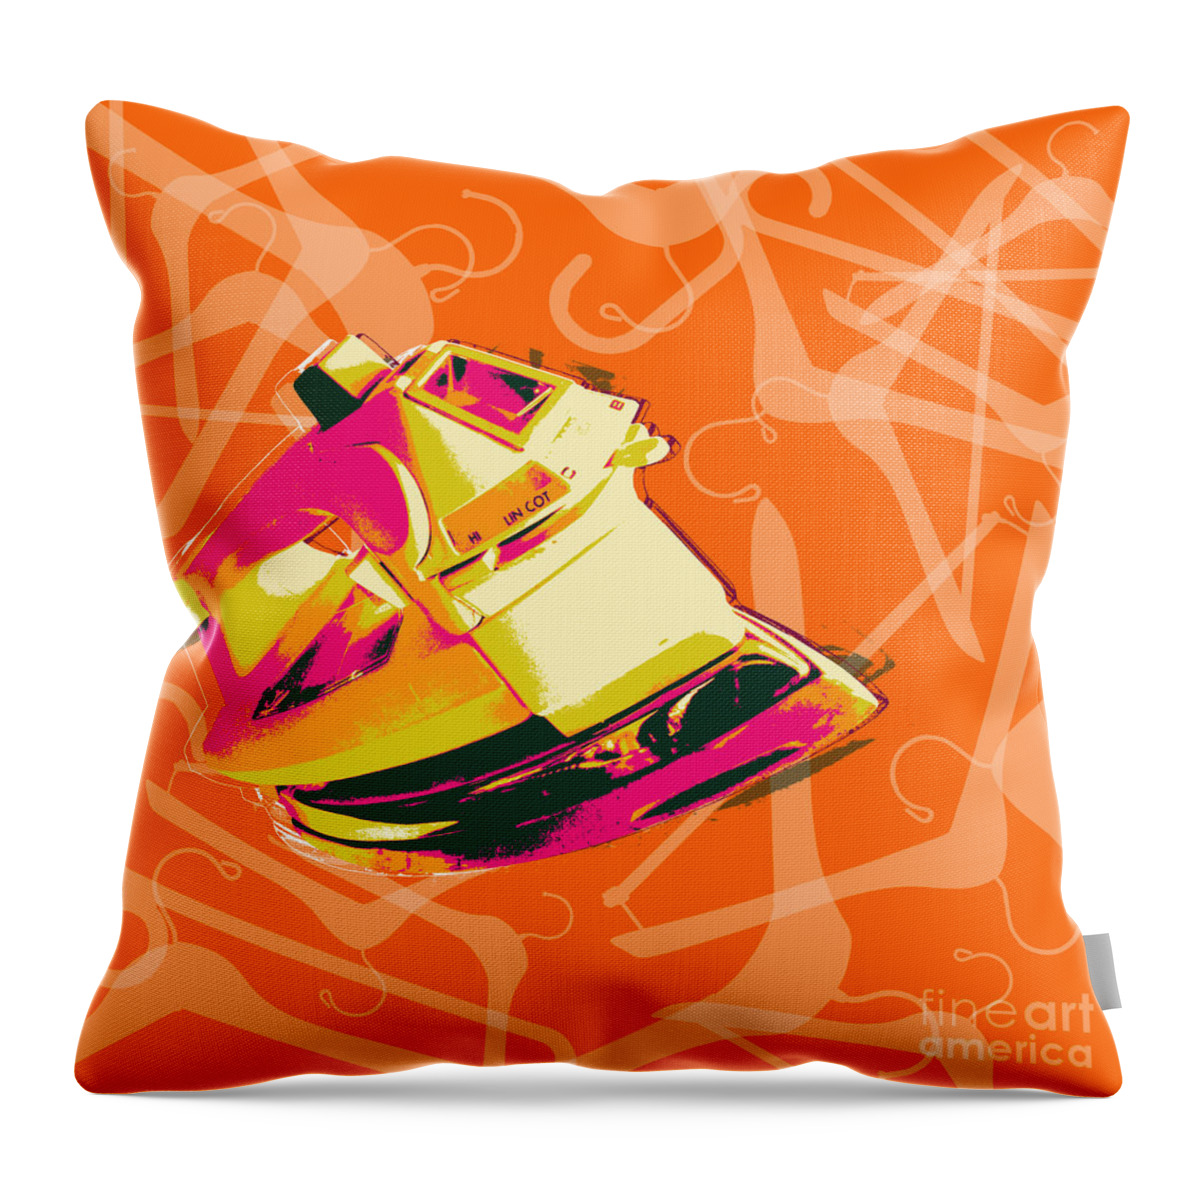 Iron Throw Pillow featuring the digital art Clothes Iron Pop Art by Jean luc Comperat